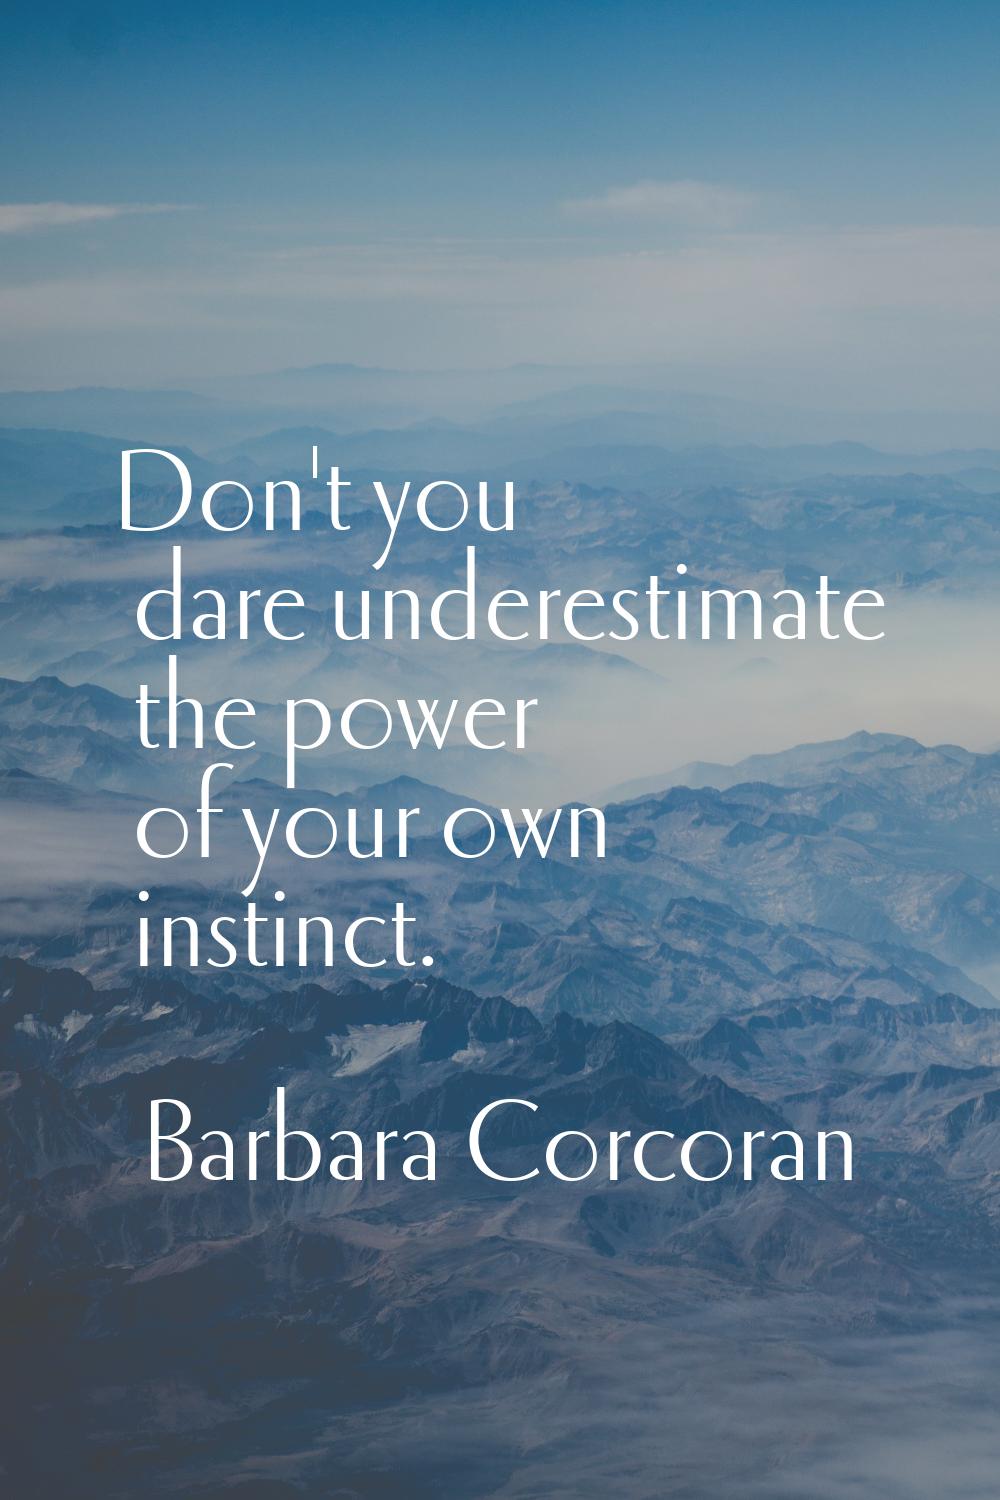 Don't you dare underestimate the power of your own instinct.